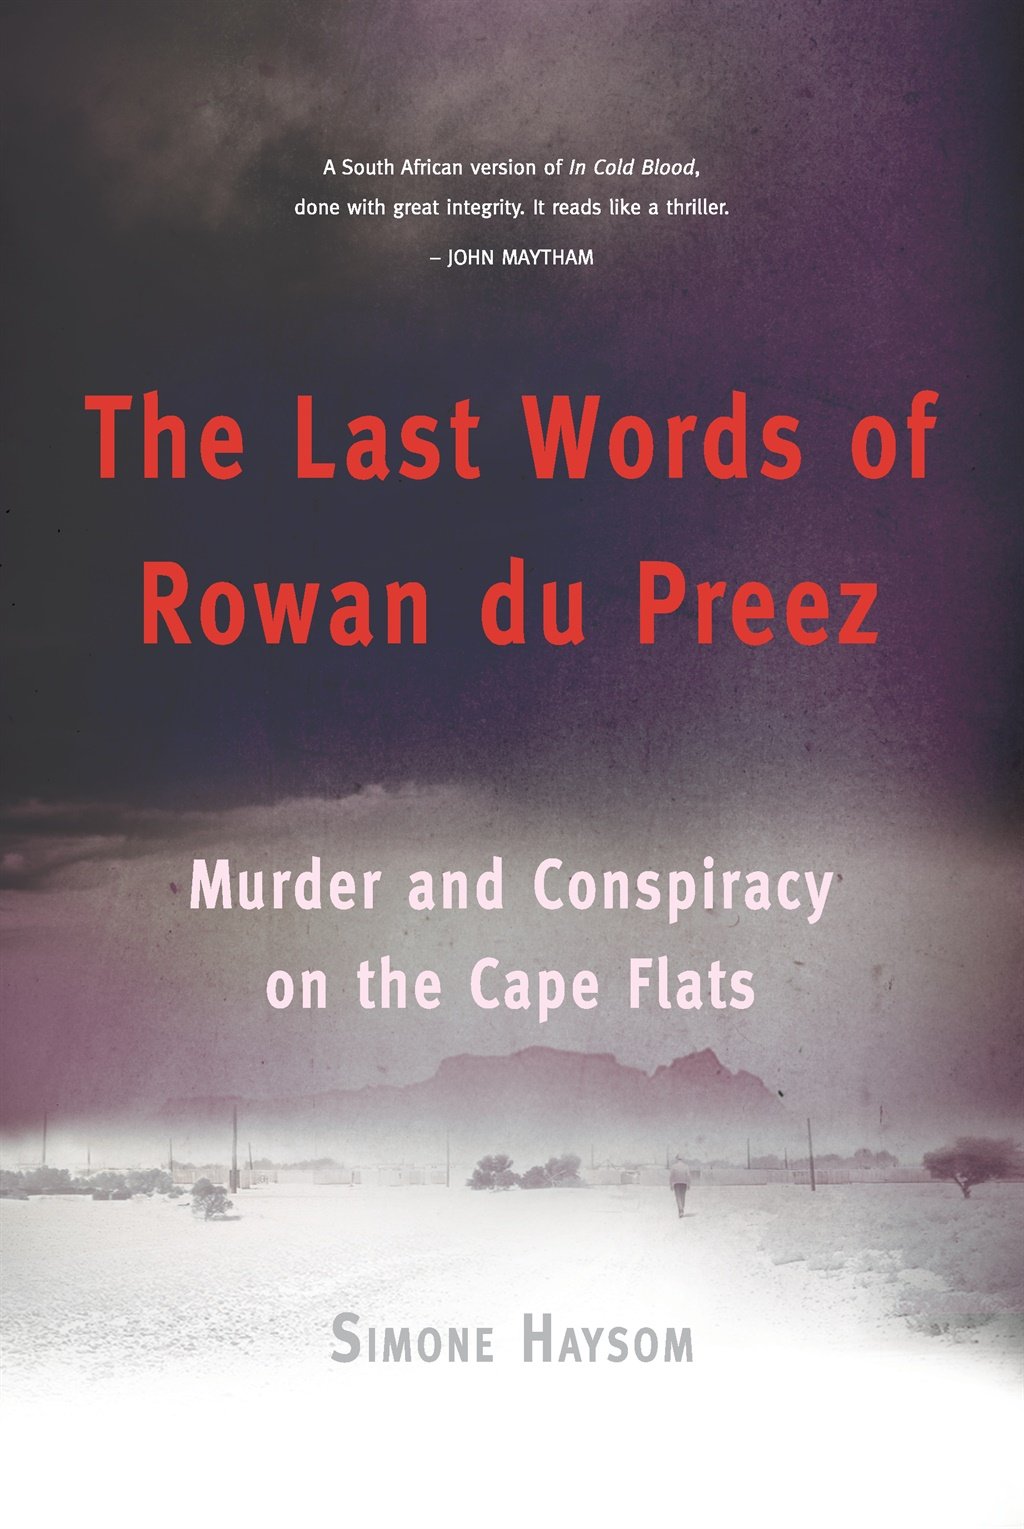 The Last Words of Rowan du Preez, published by Jonathan Ball Publishers.